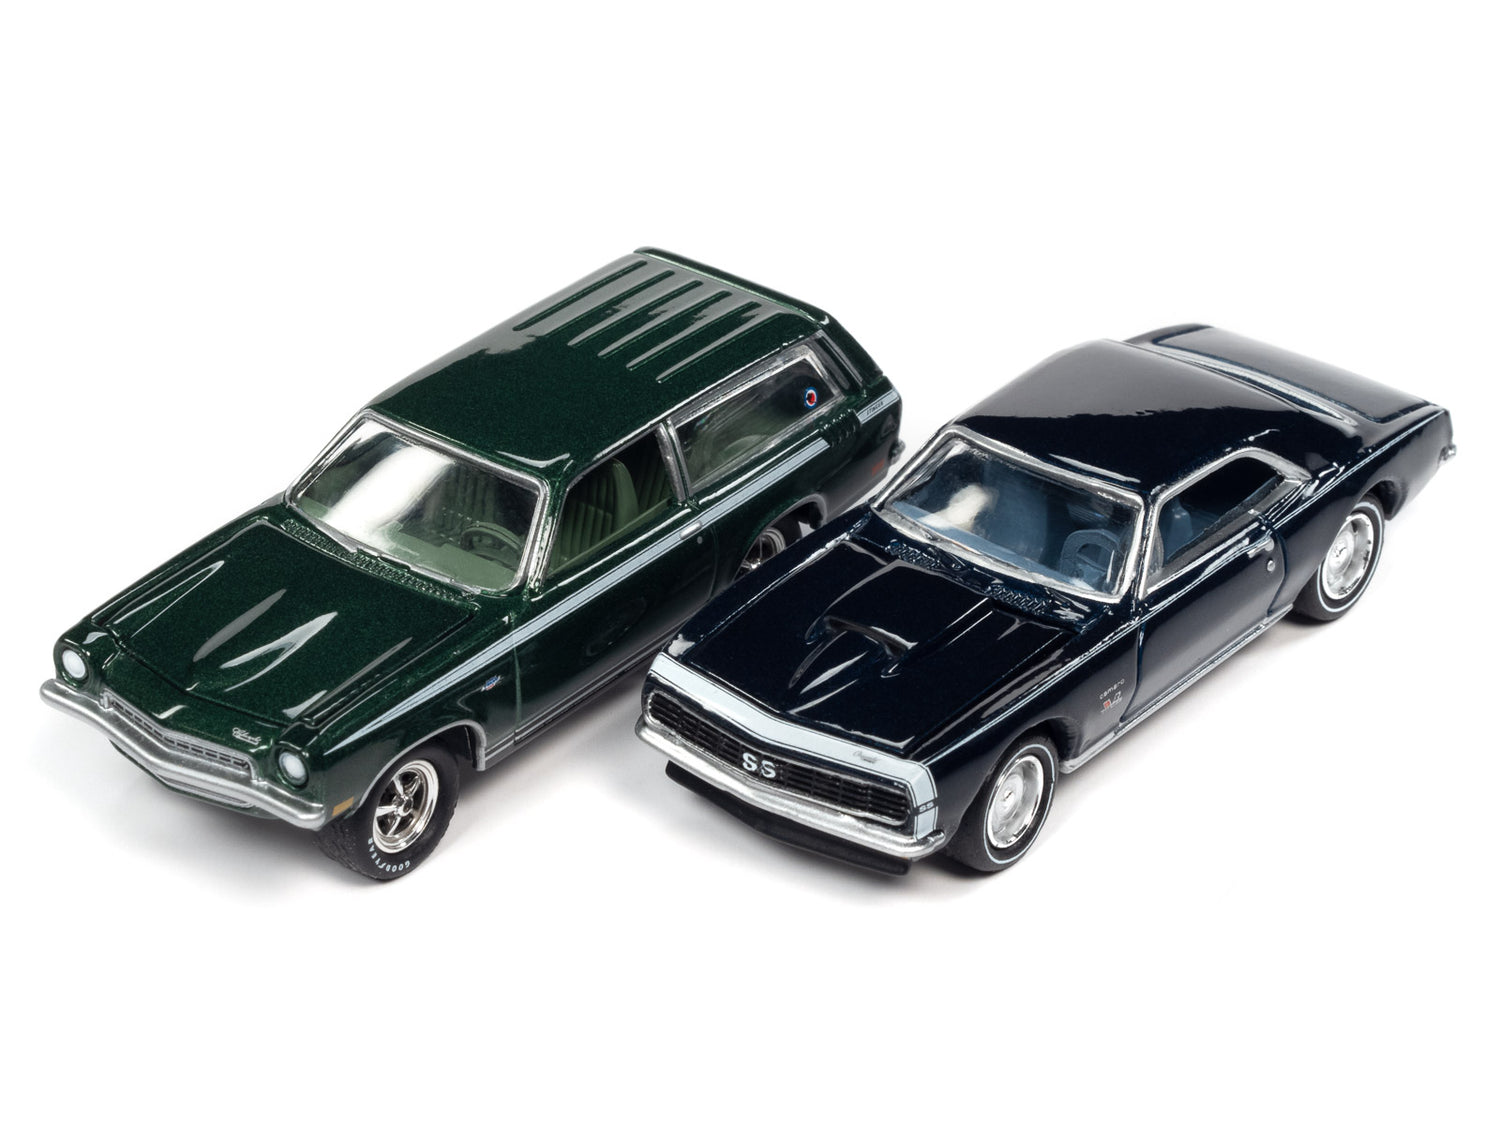 Johnny Lightning 2021 Release 3 Yenko Version A (2-Pack) 1:64 Scale Diecast